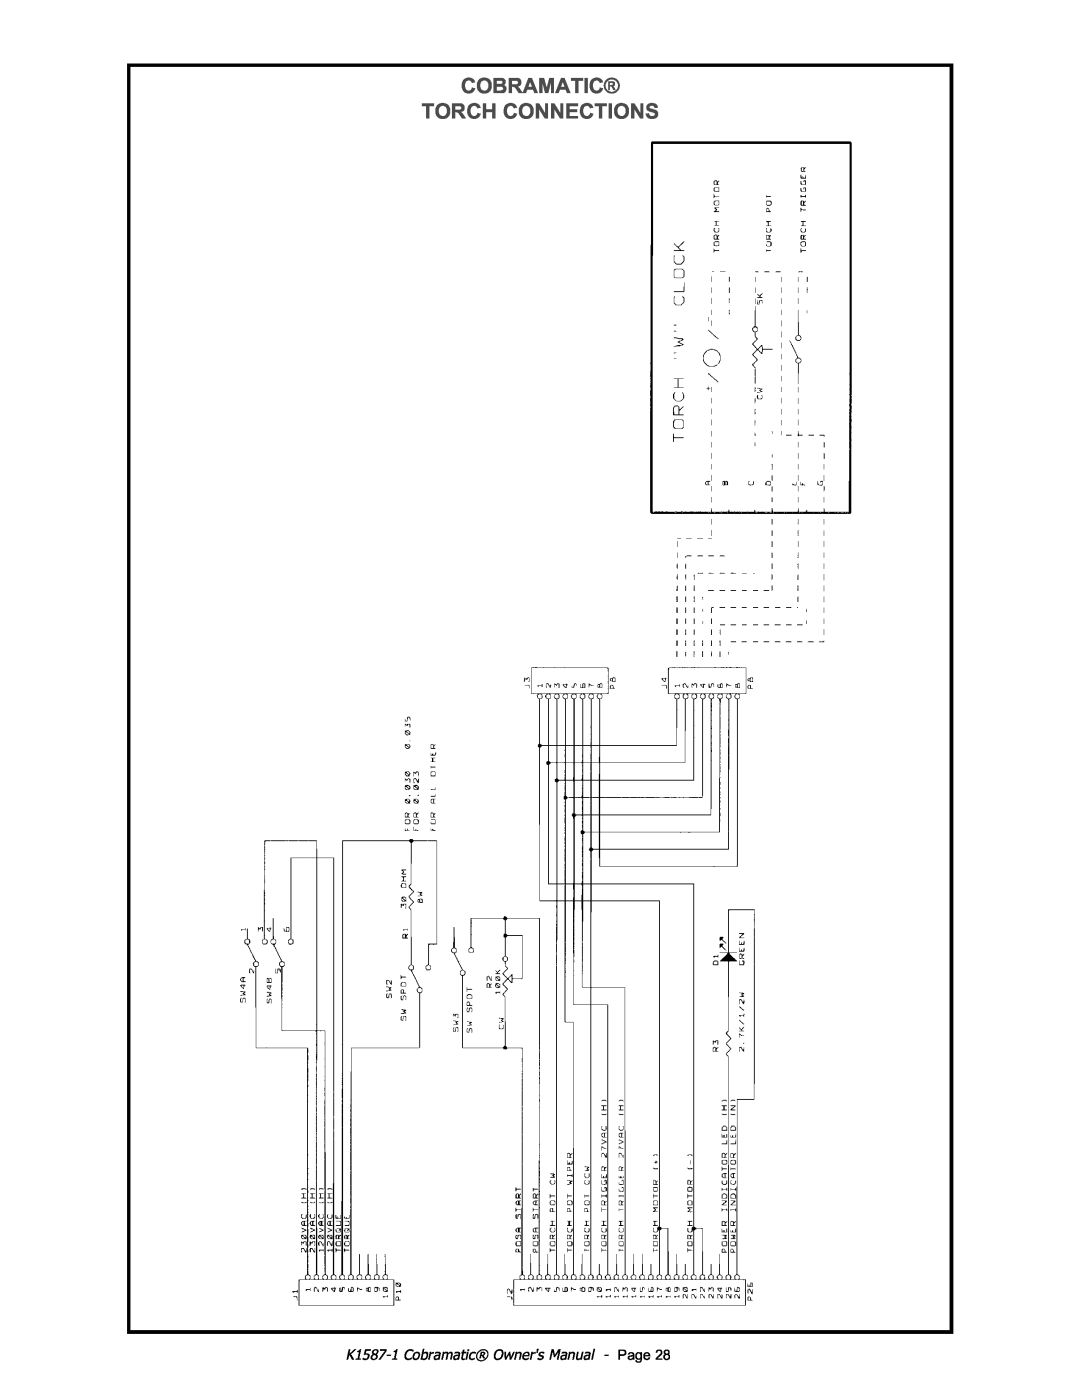 Lincoln Electric IM597 manual Cobramatic Torch Connections, K1587-1 Cobramatic Owners Manual - Page 